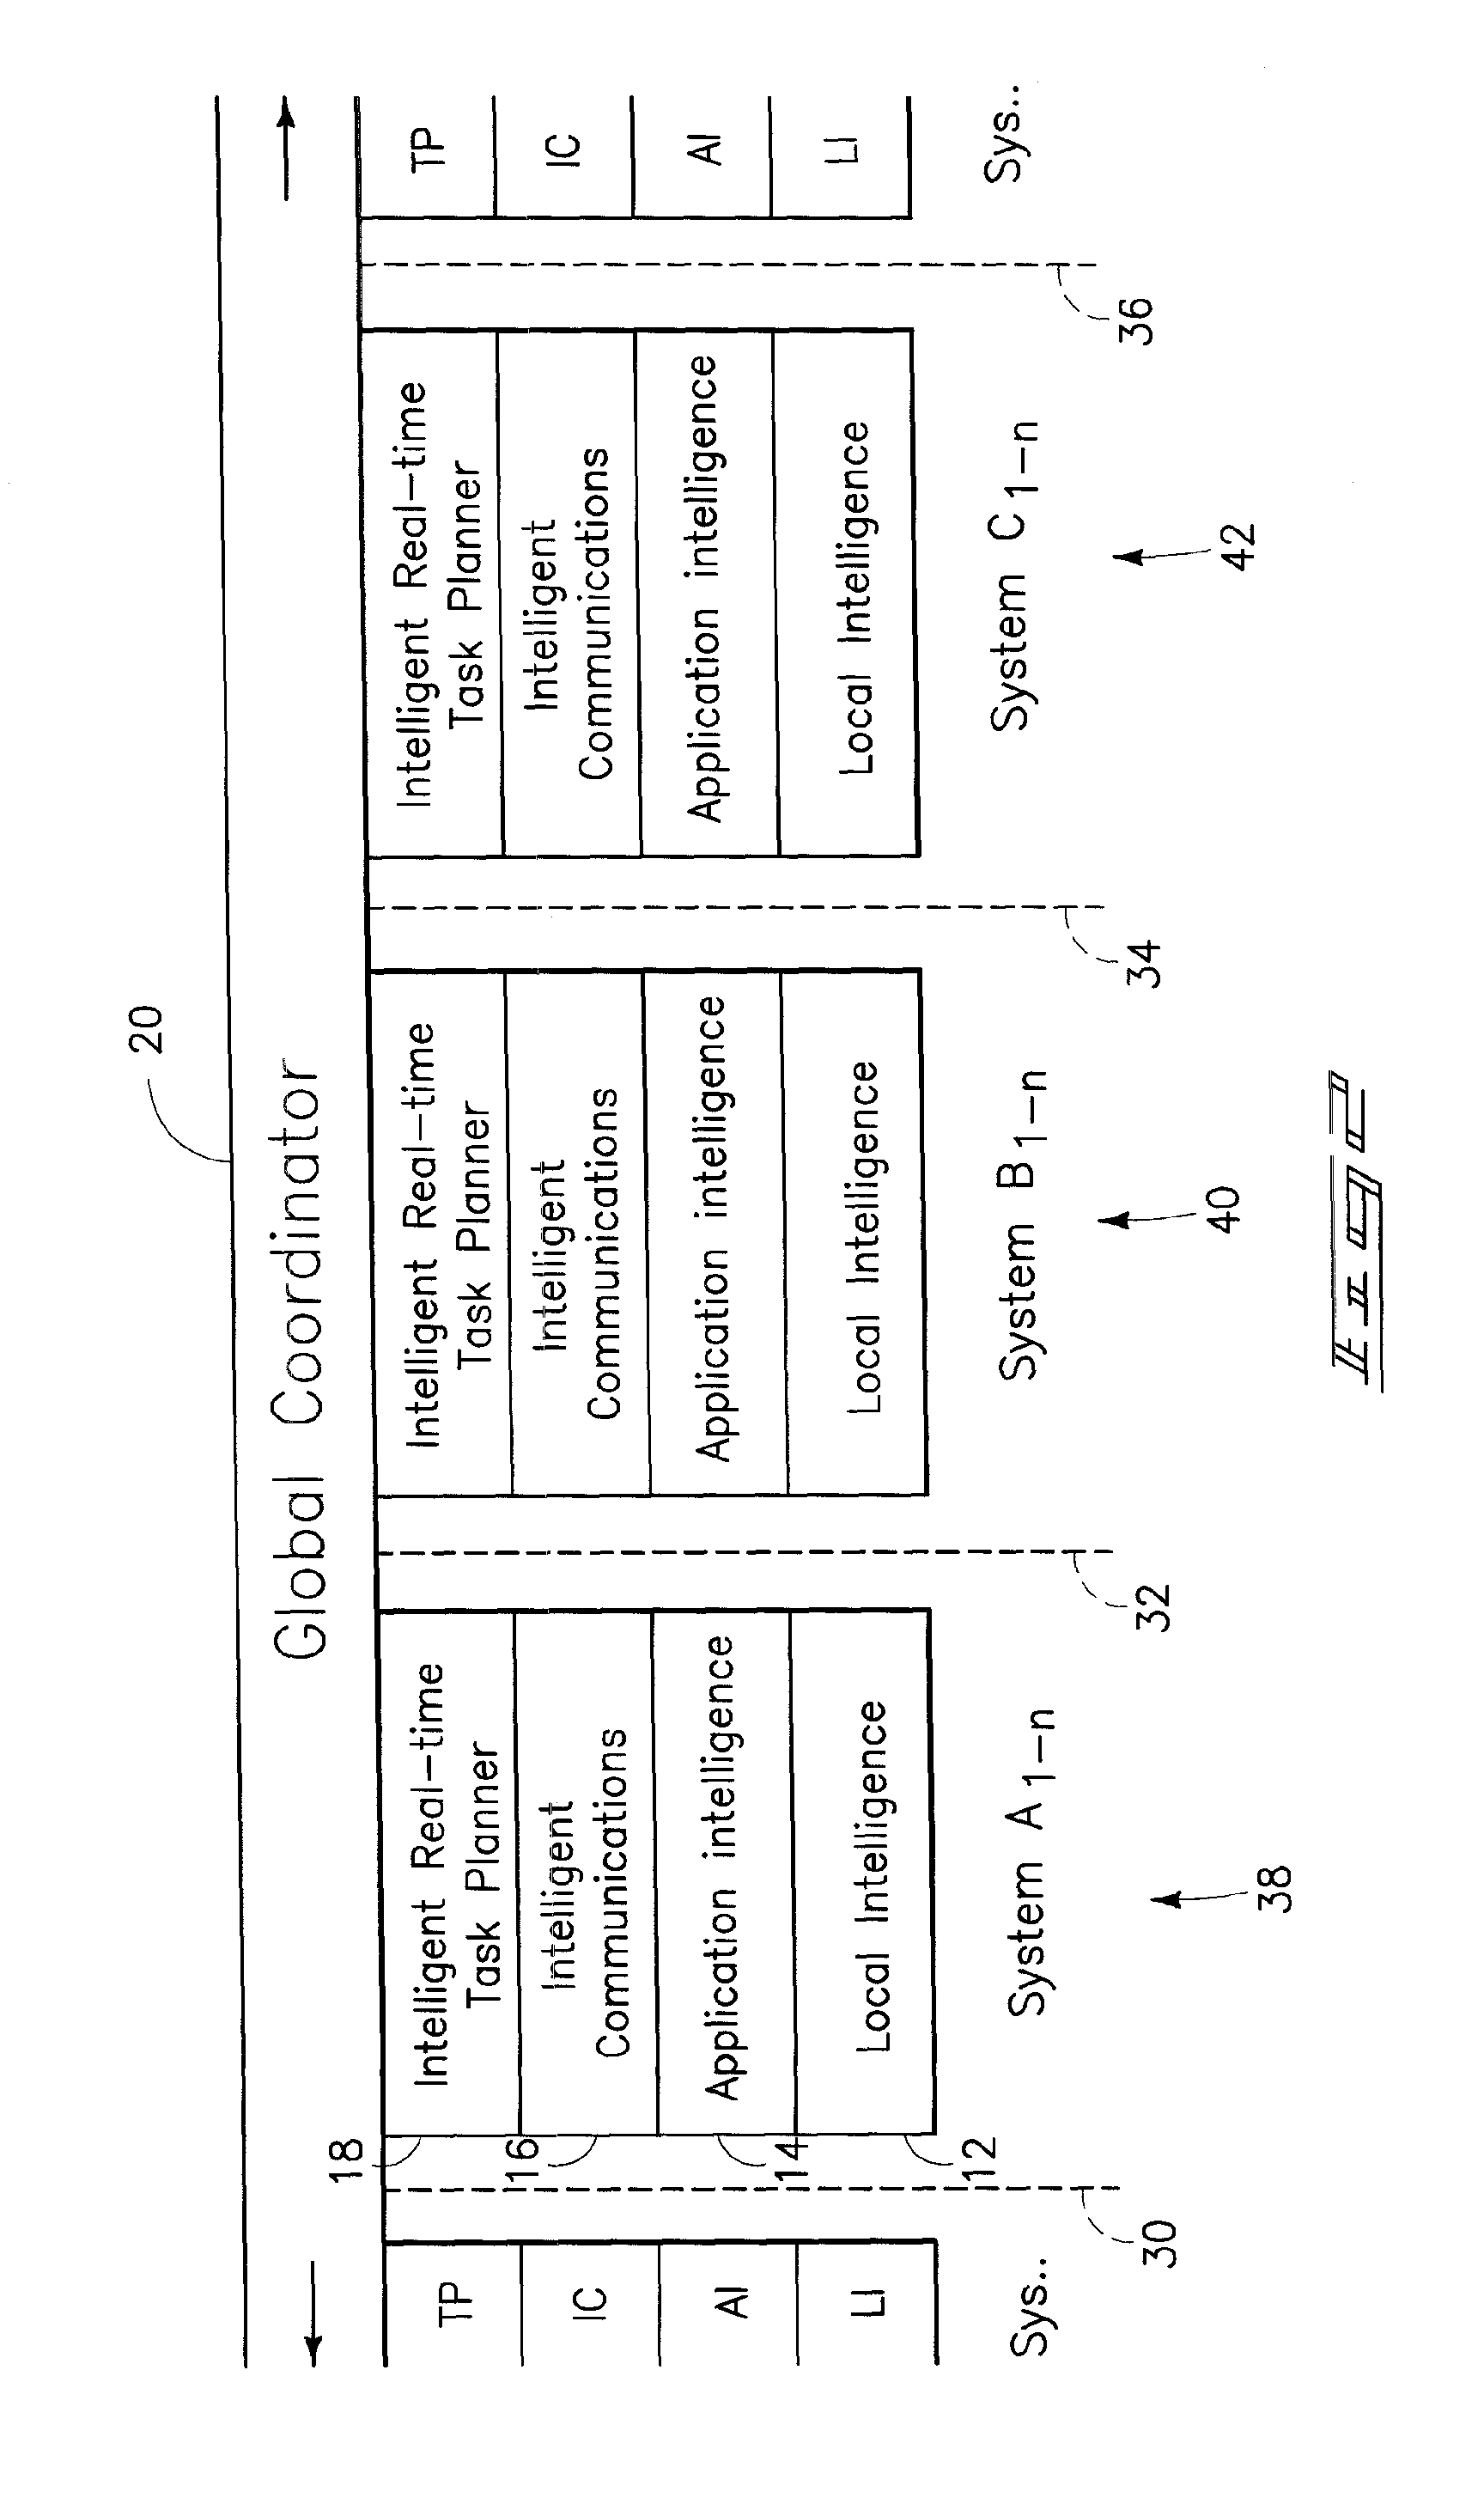 Systems and methods for the autonomous control, automated guidance, and global coordination of moving process machinery